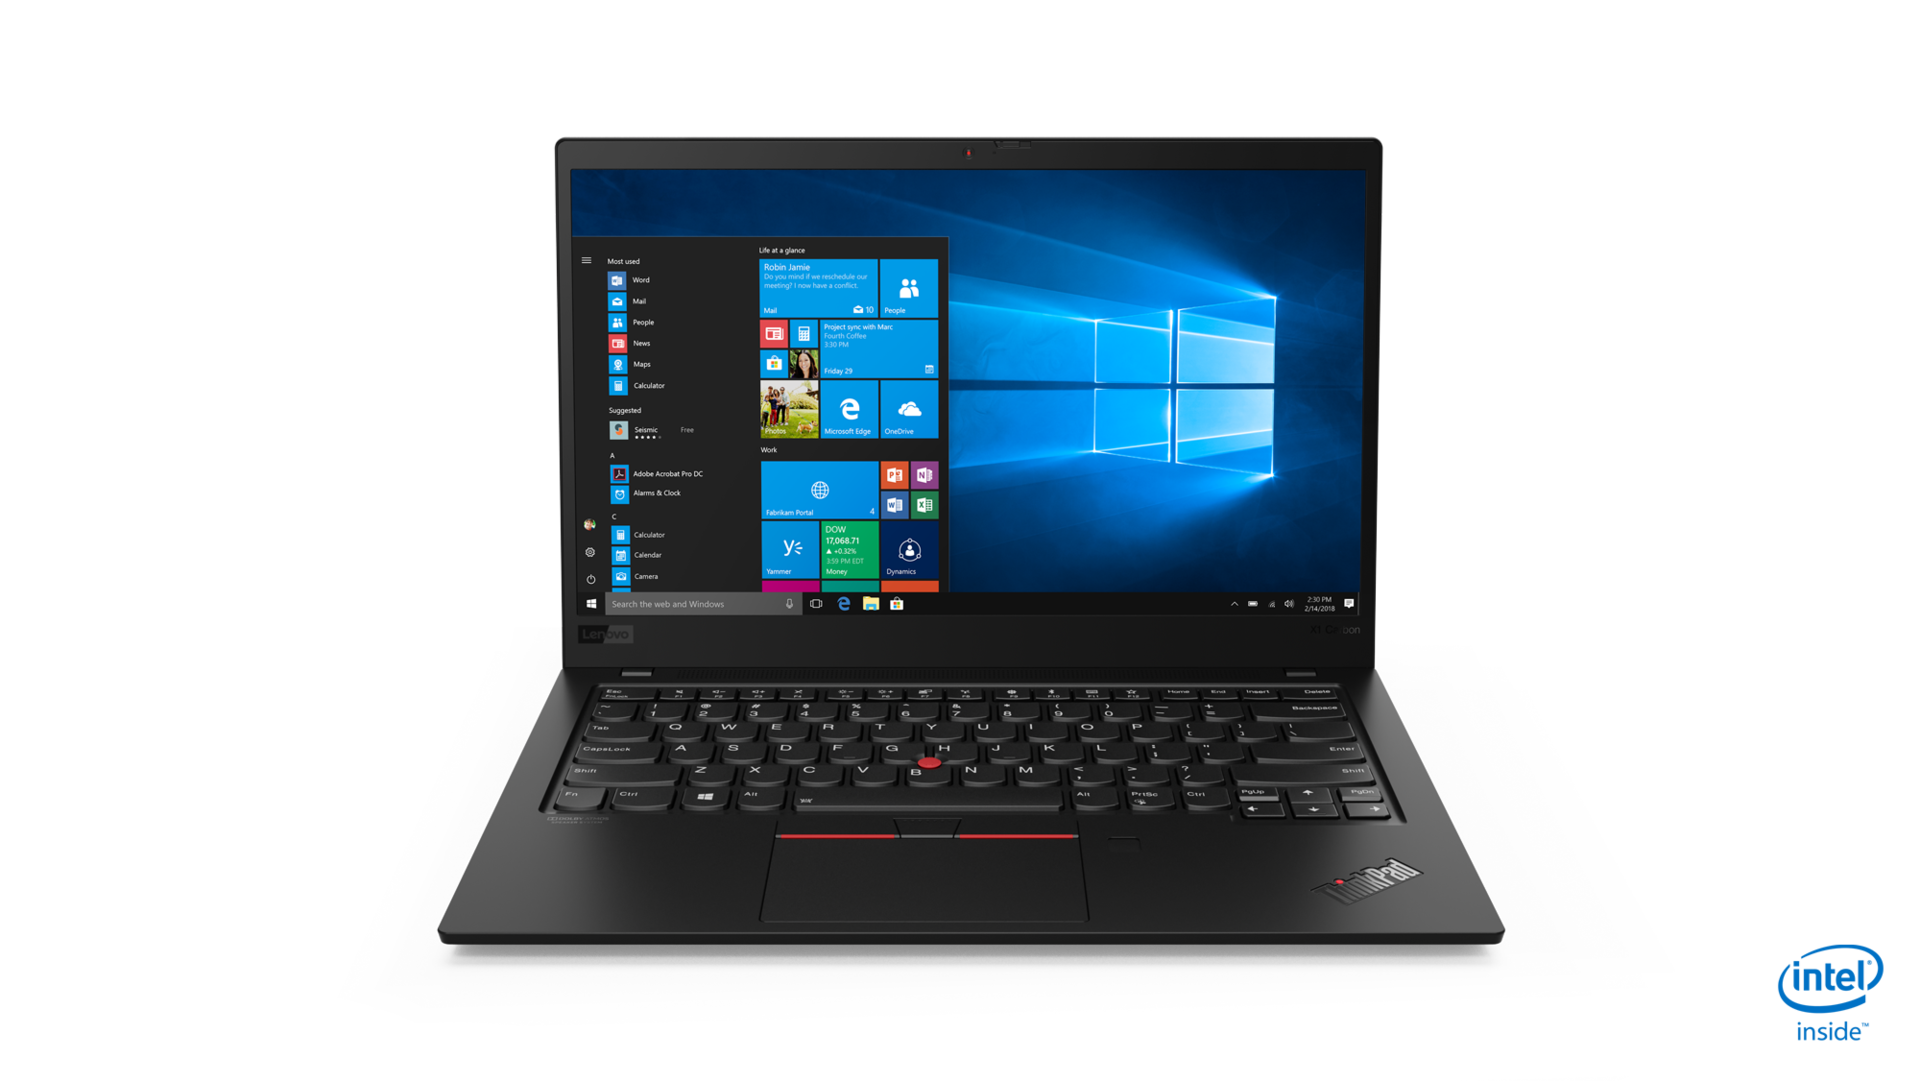 Lenovo ThinkPad X1 Carbon 2019 adds brighter LCDs, better speakers & a